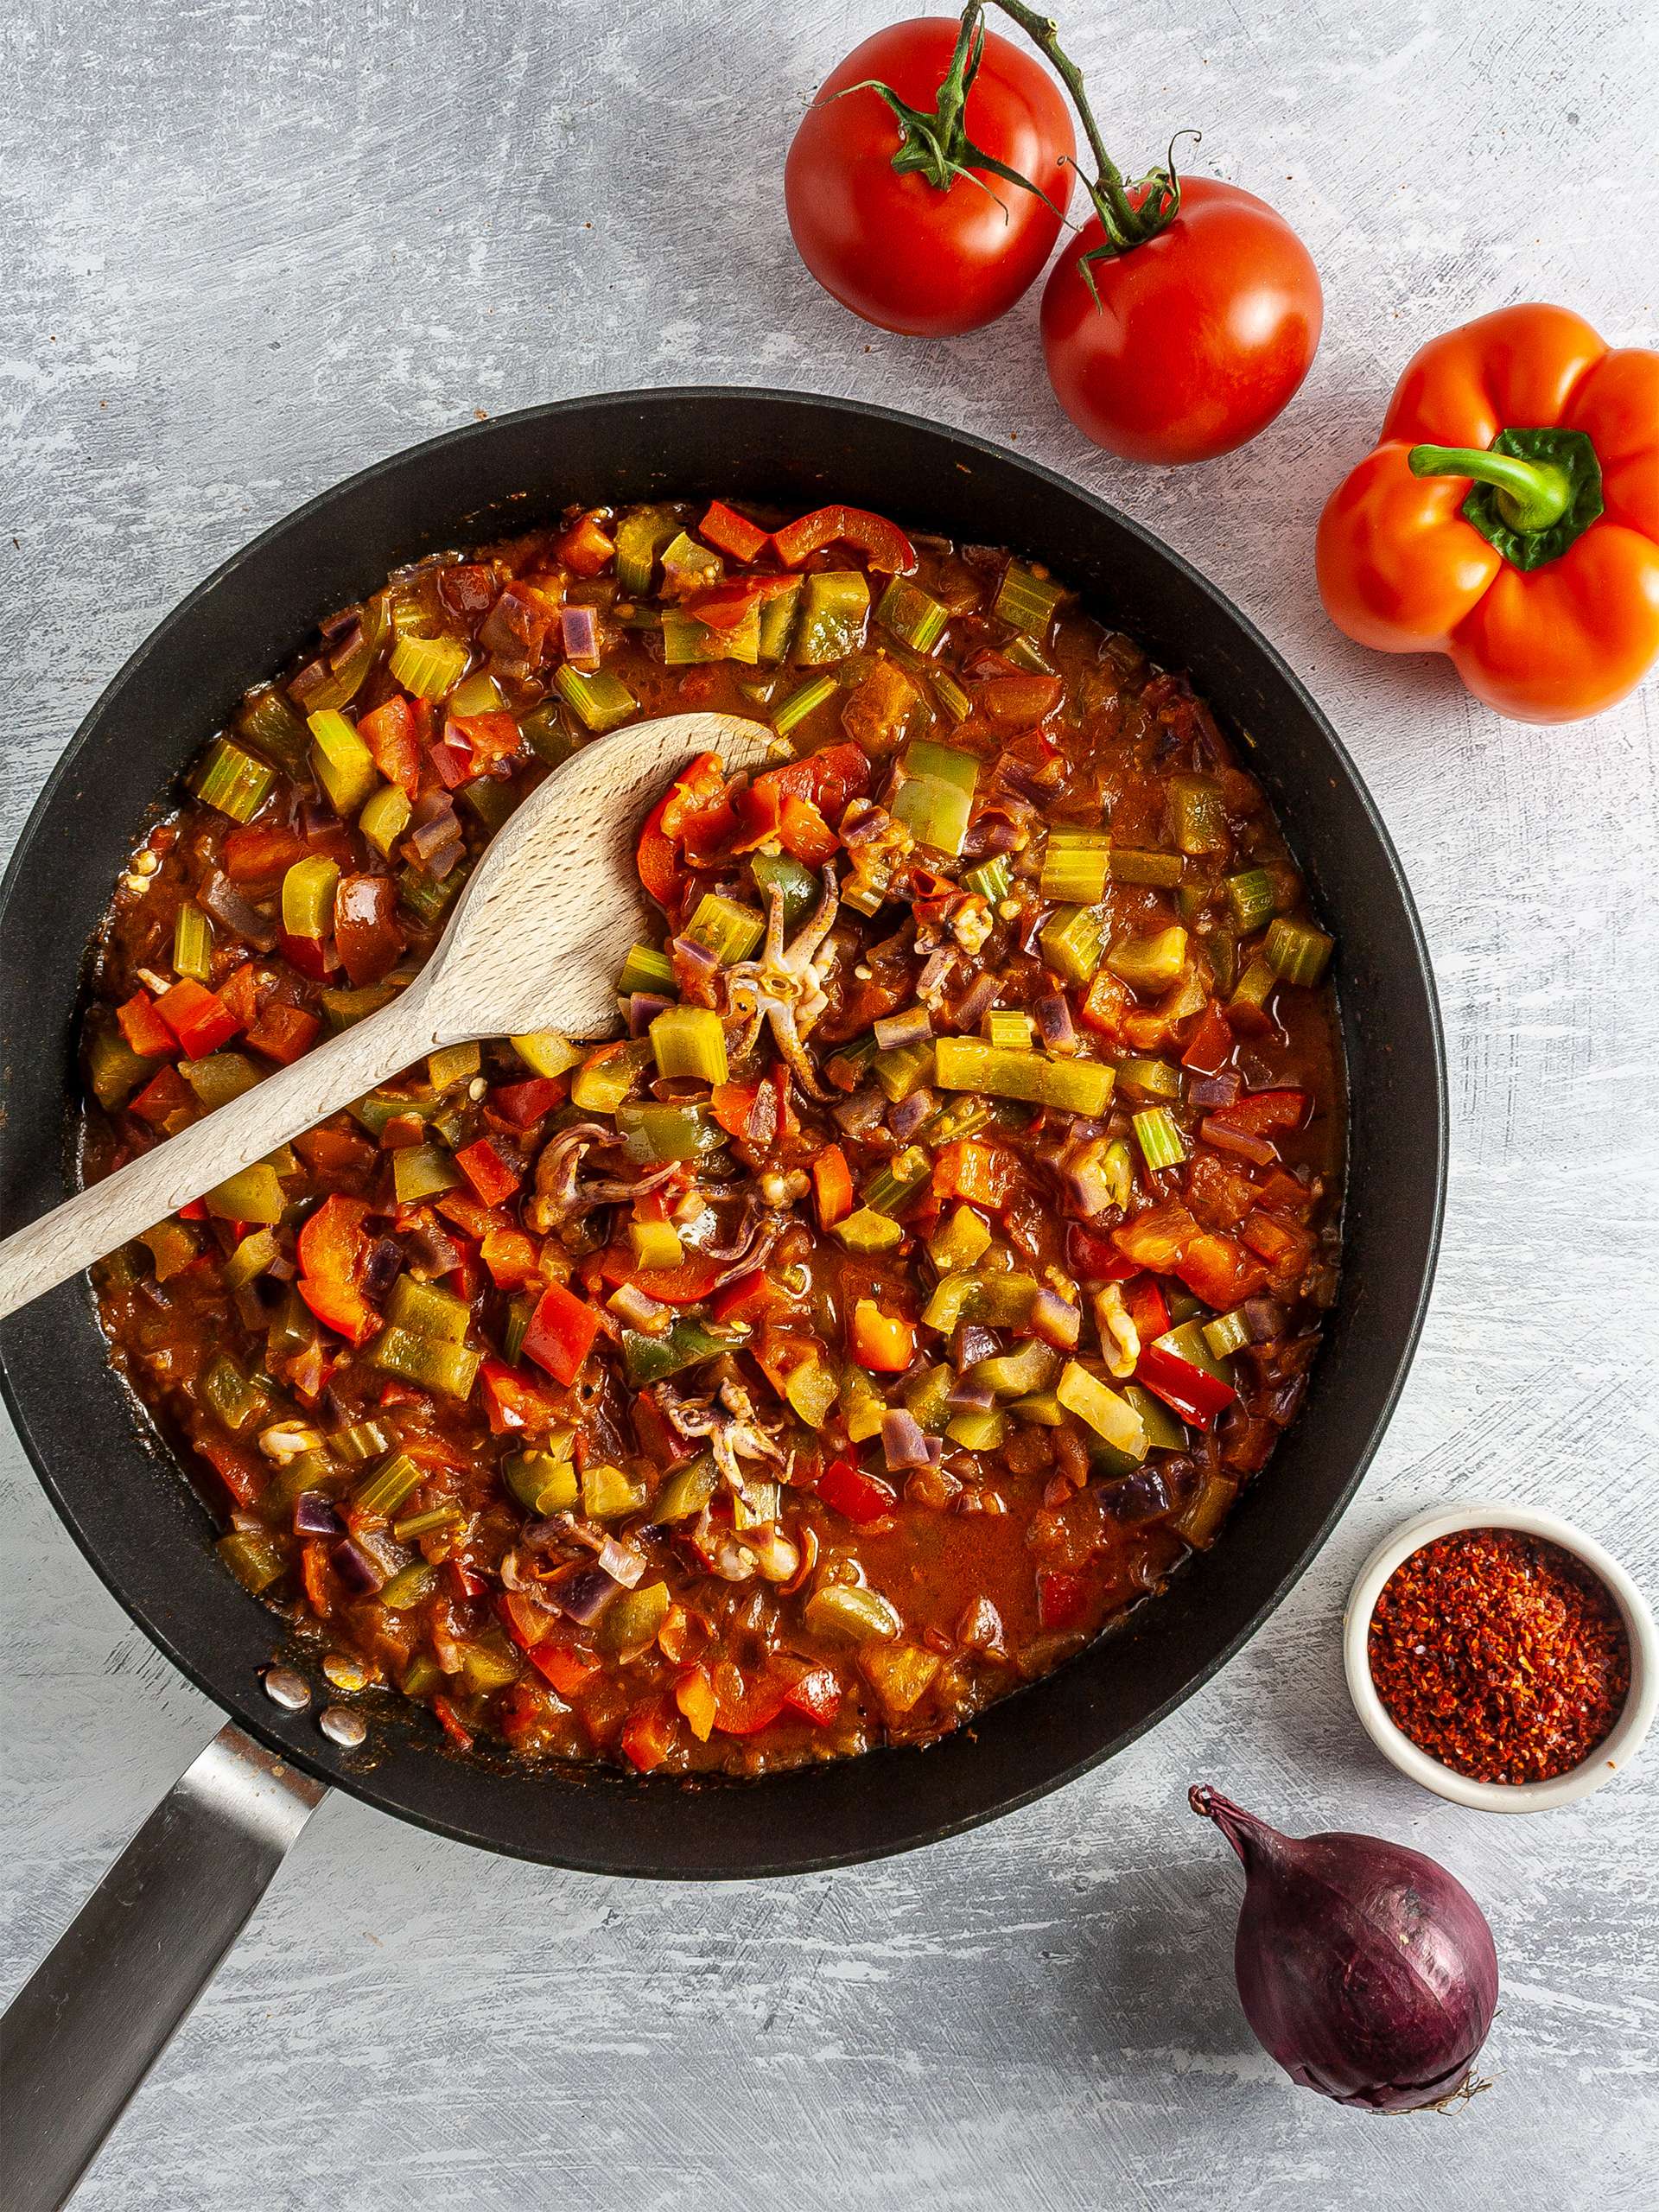 Cooked tomatoes, pepper, onions, and celery in a skillet